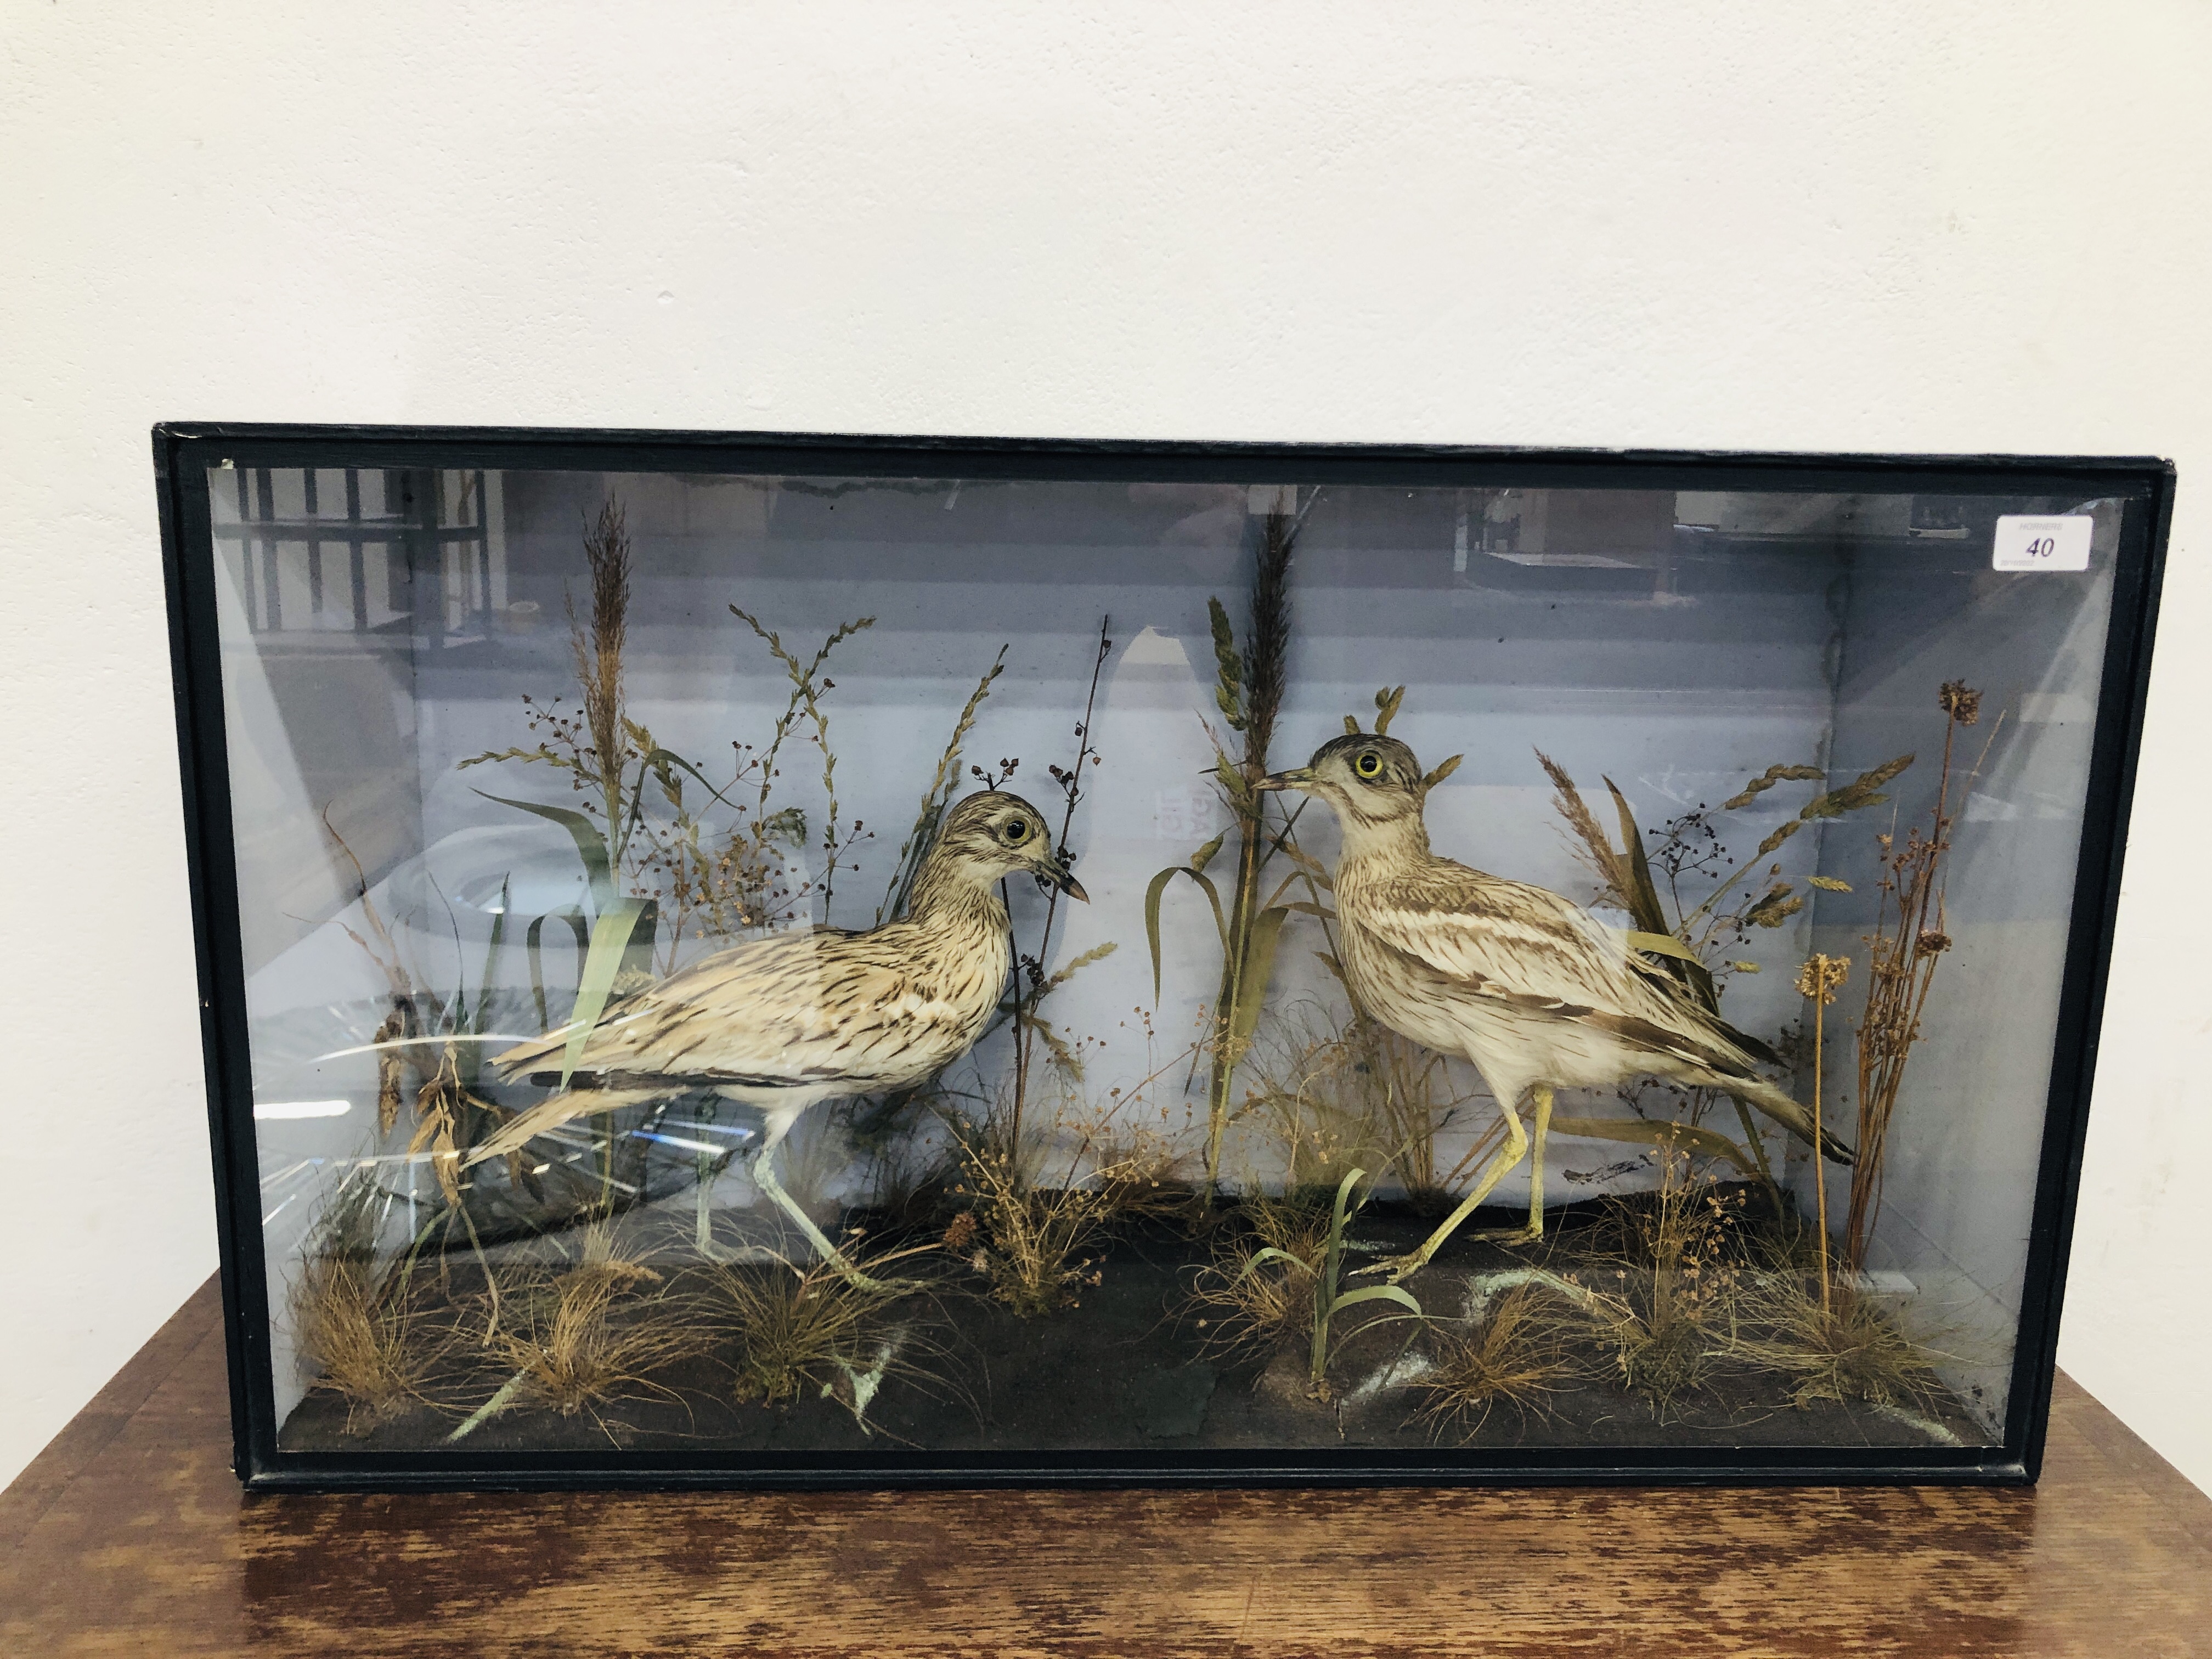 VICTORIAN CASED TAXIDERMY STUDY, A PAIR OF STONE CURLEW, W 80CM X H 45.5CM.